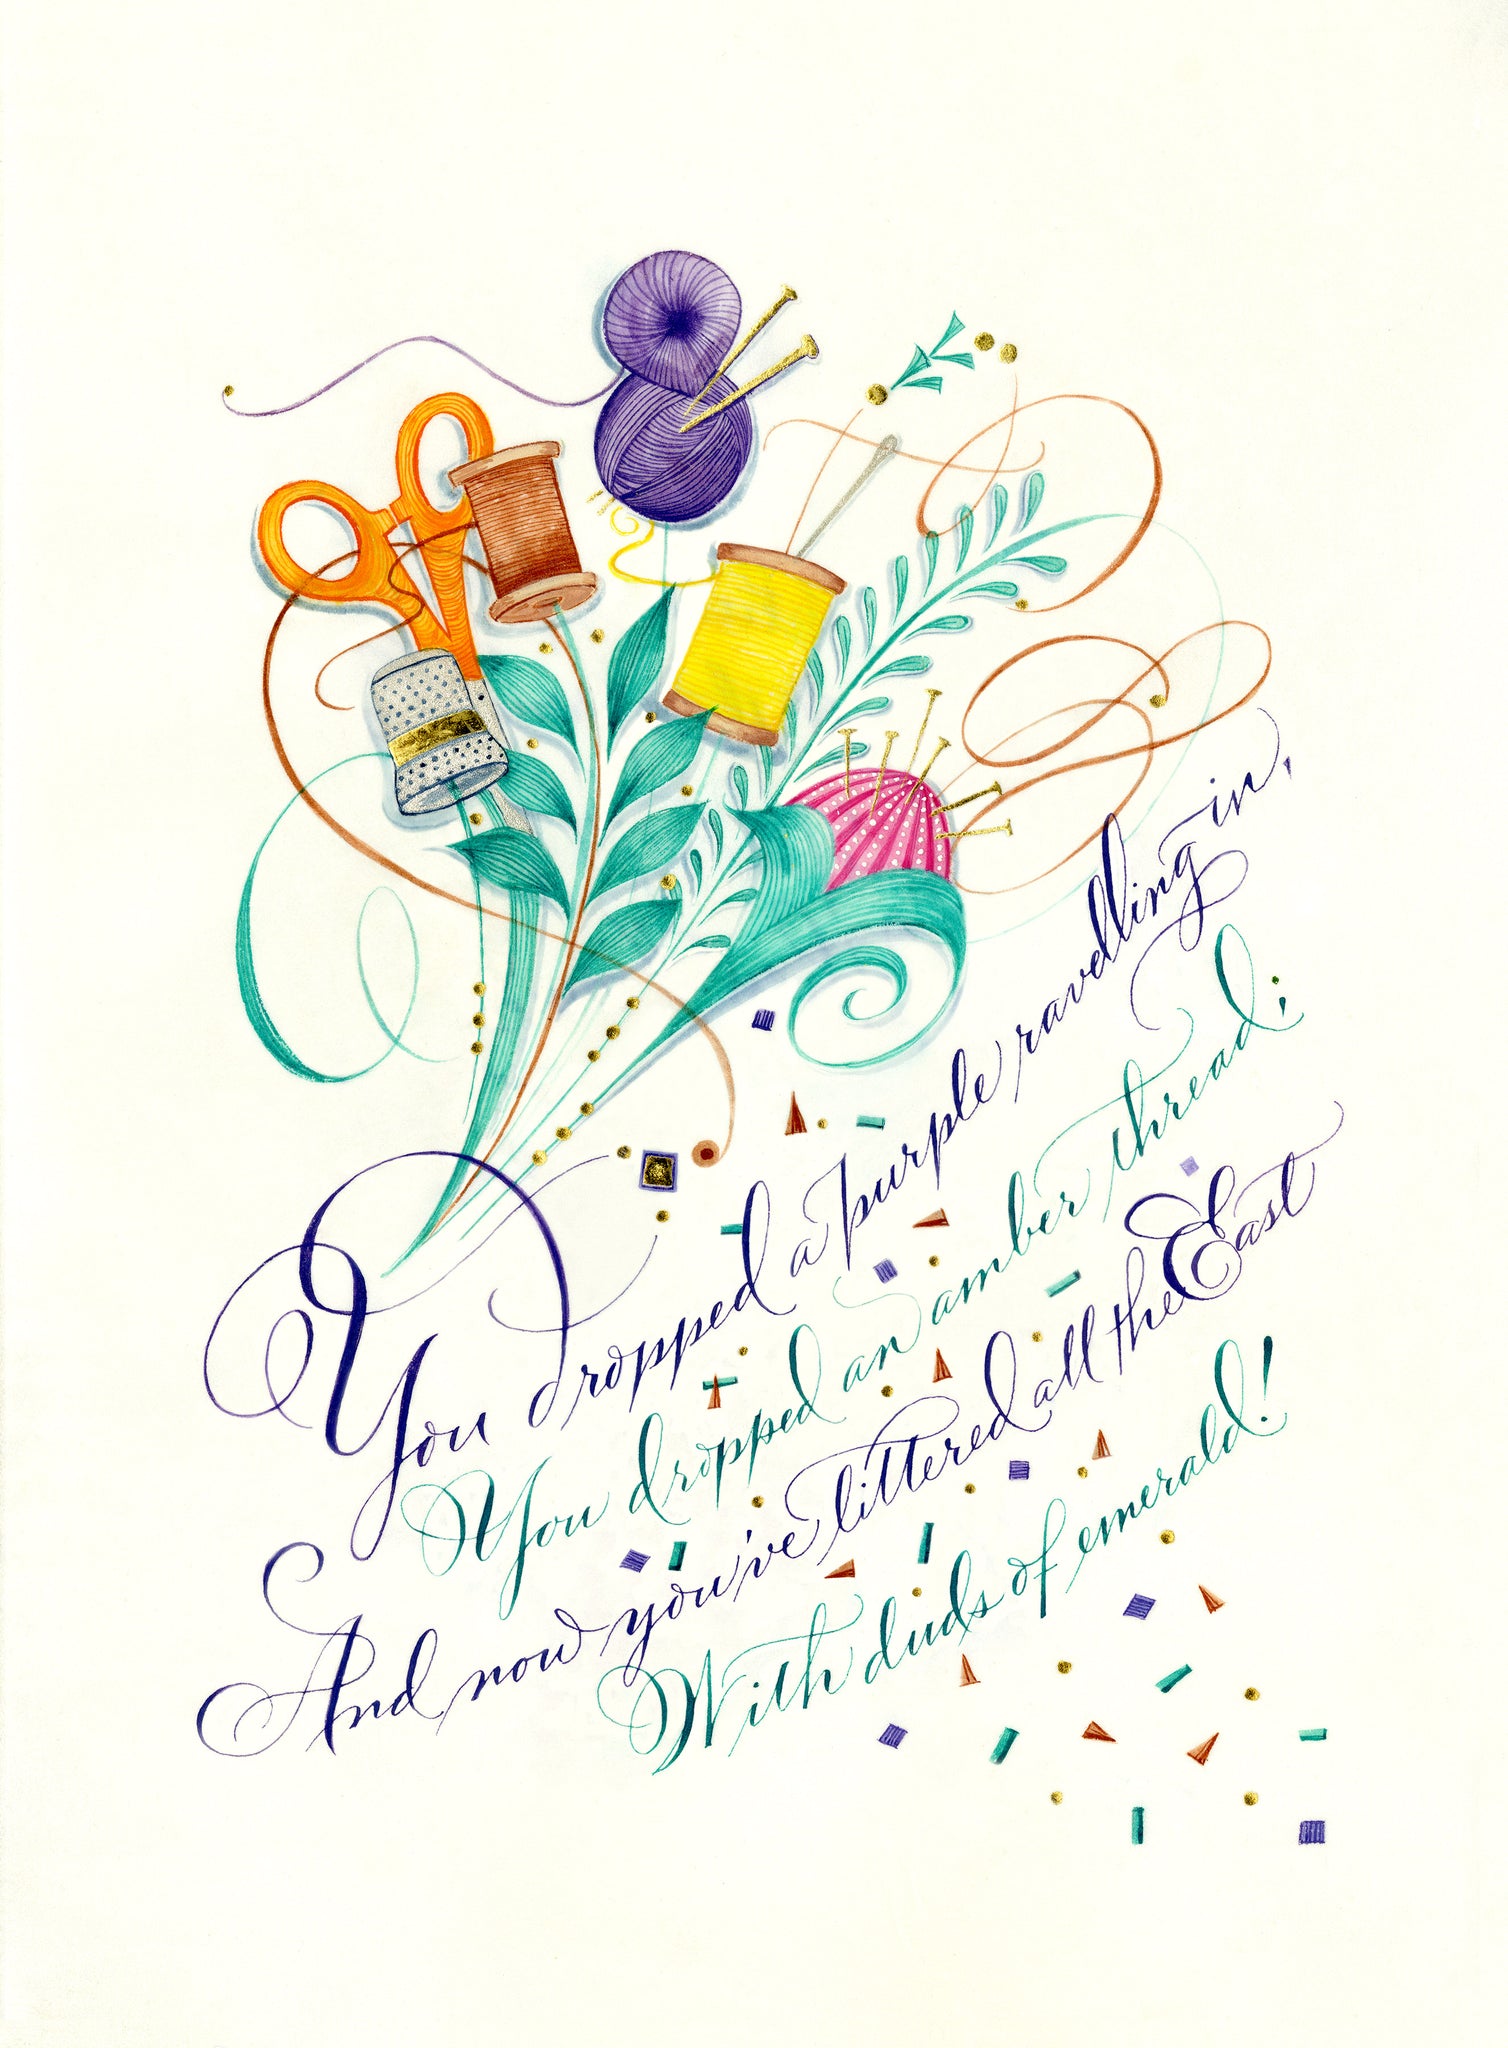 You Dropped a Purple Ravelling - Holly Monroe Calligraphy Prints